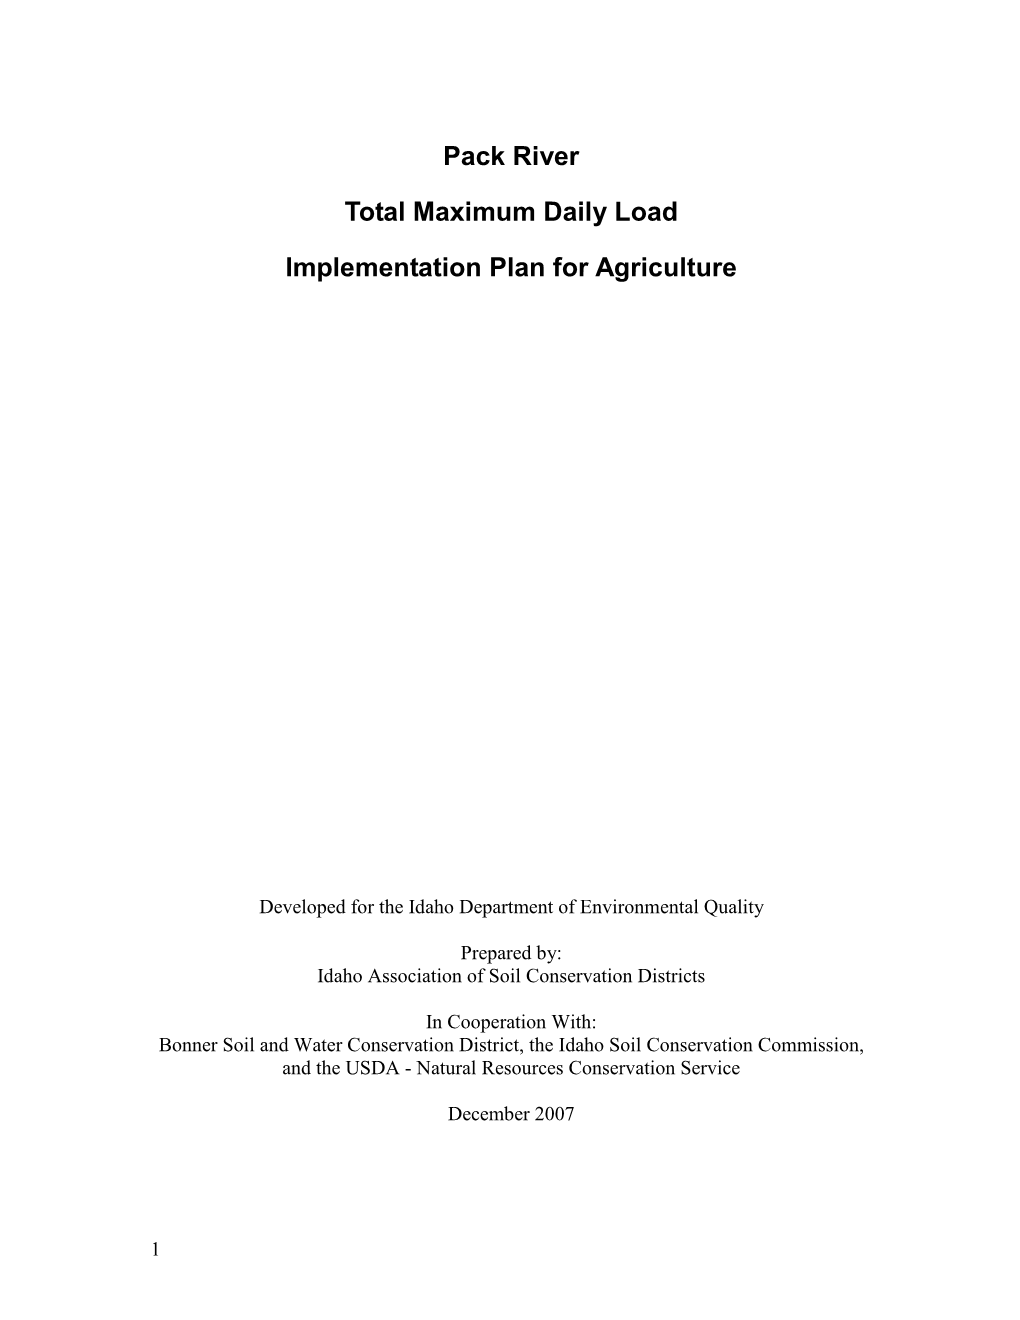 Pack River Total Maximum Daily Load Implementation Plan for Agriculture